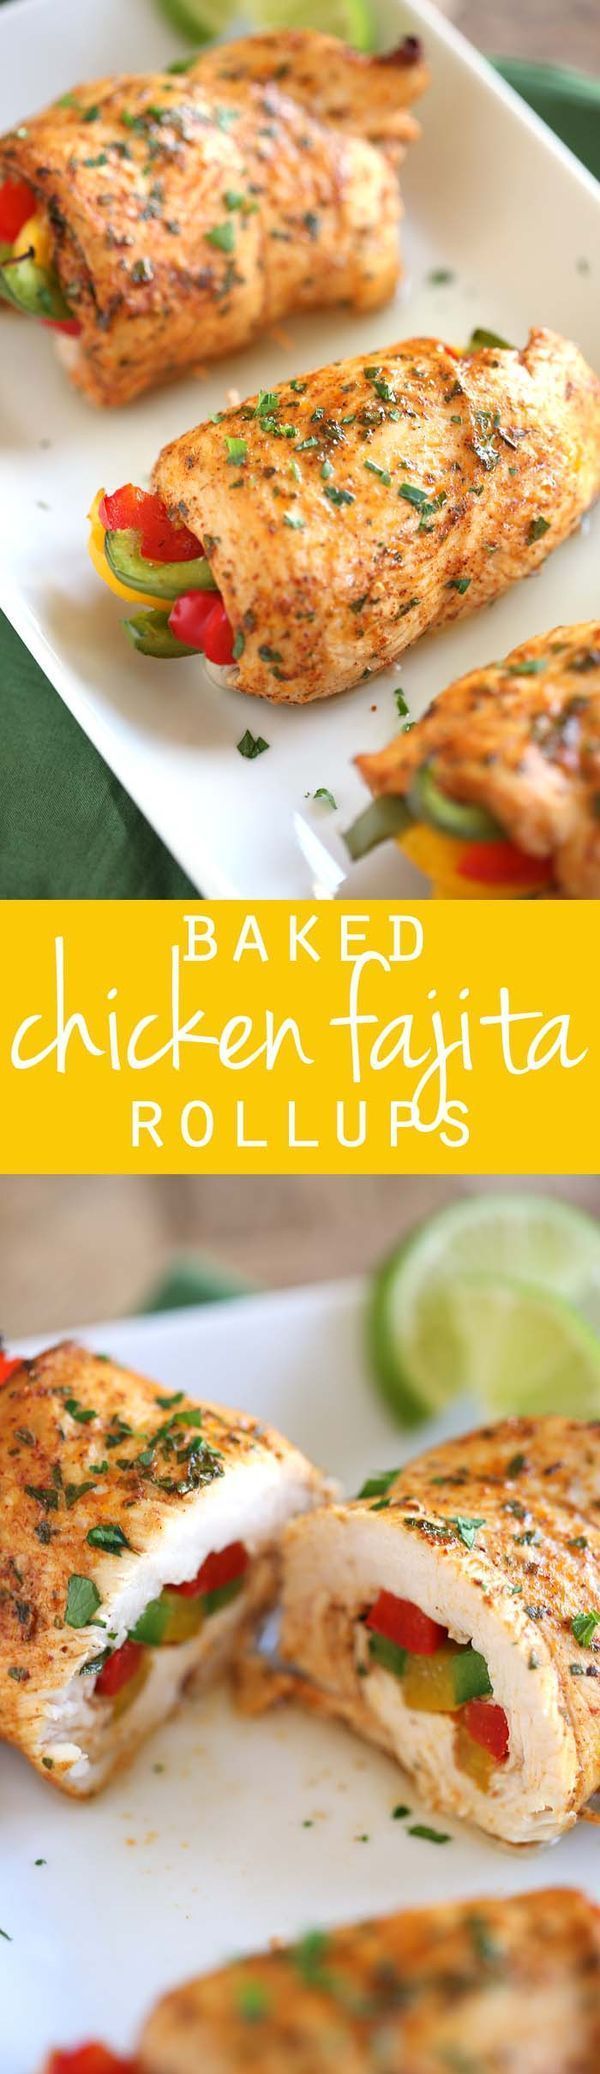 These Baked Chicken Fajita Roll-Ups are easy to make, super moist and make the perfect delicious low-carb meal!